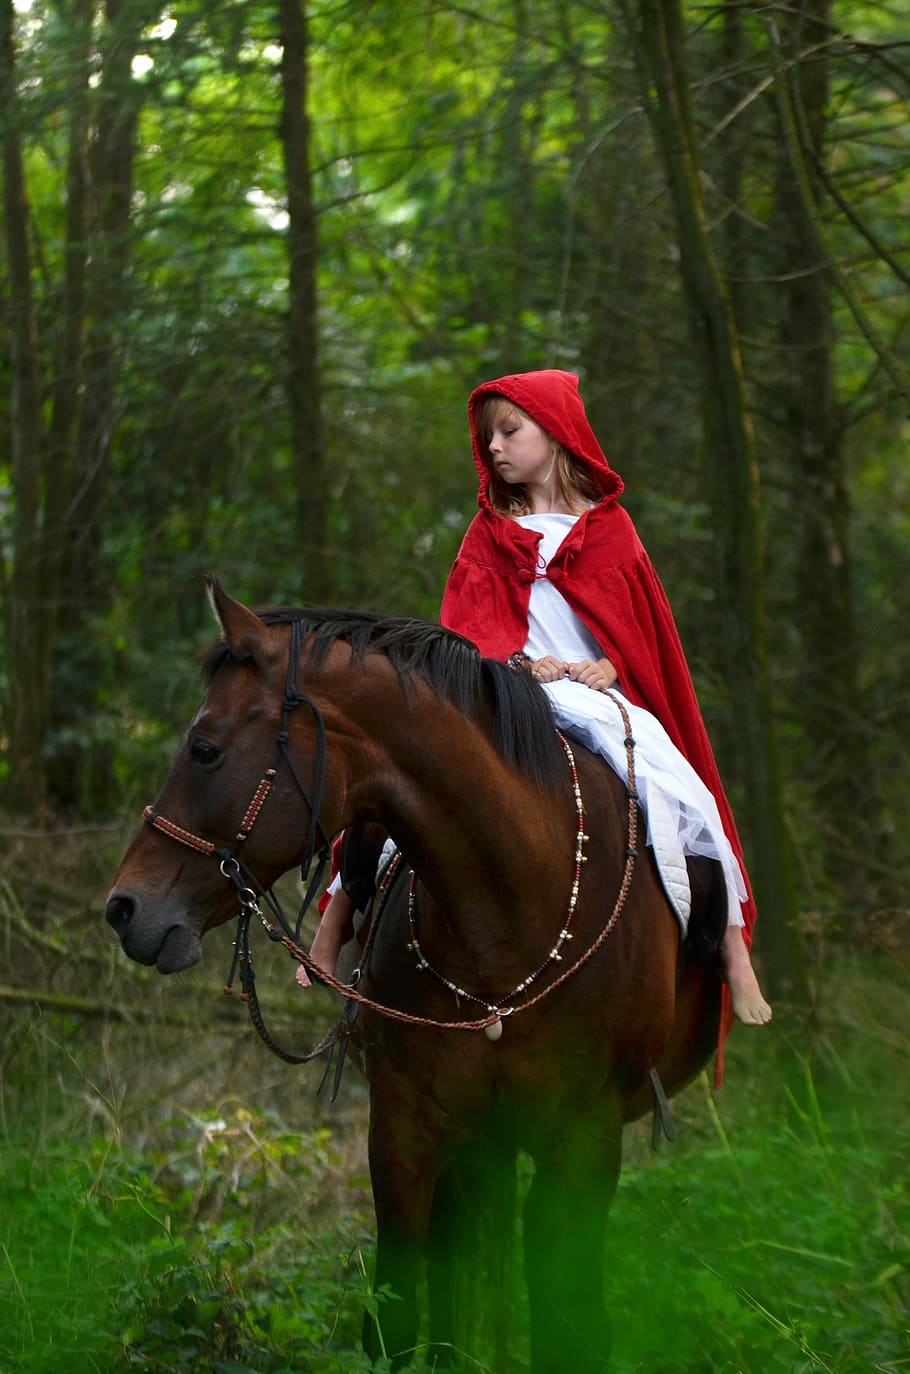 horse, horses, forest, red hood, little red riding hood, fairy tale, story teller, fantasy, nature, girl